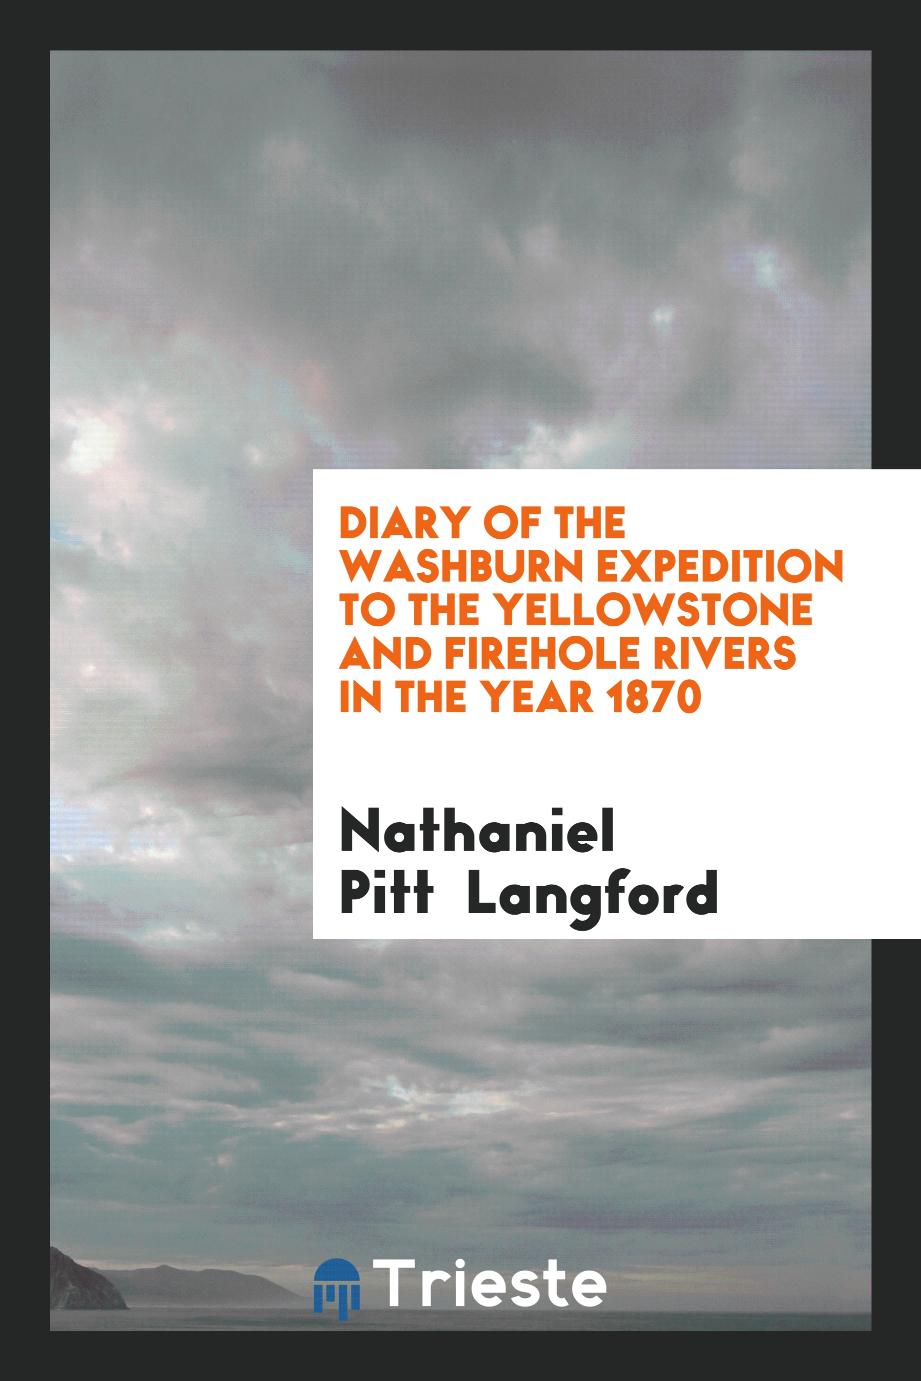 Nathaniel Pitt  Langford - Diary of the Washburn Expedition to the Yellowstone and Firehole Rivers in the Year 1870